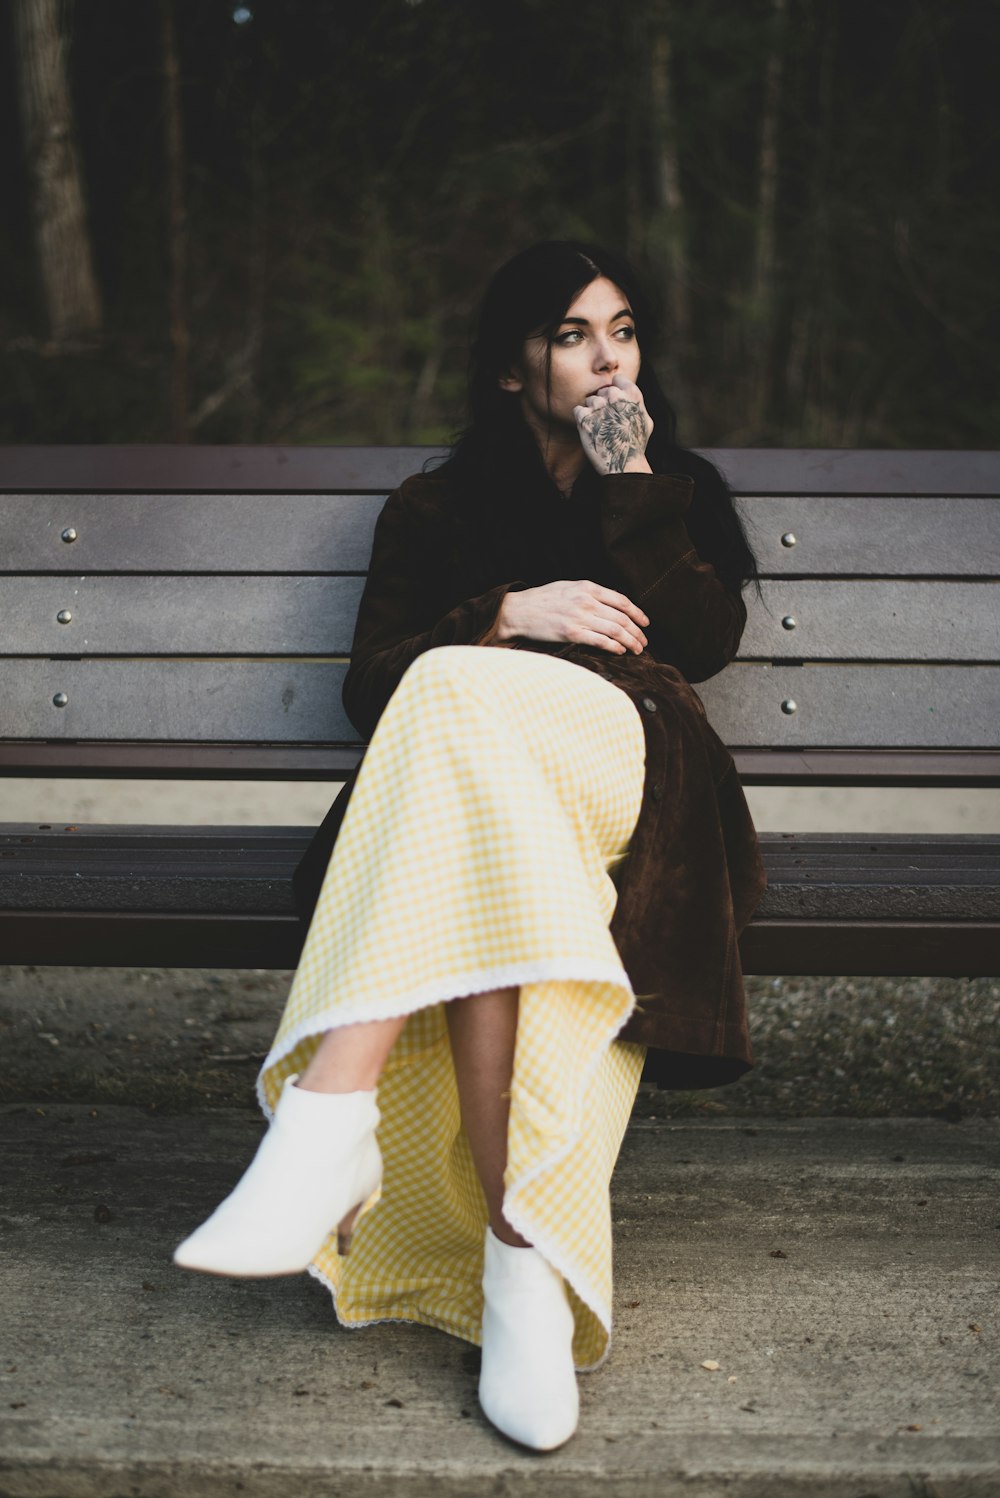 woman in black coat and white skirt sitting on brown wooden bench